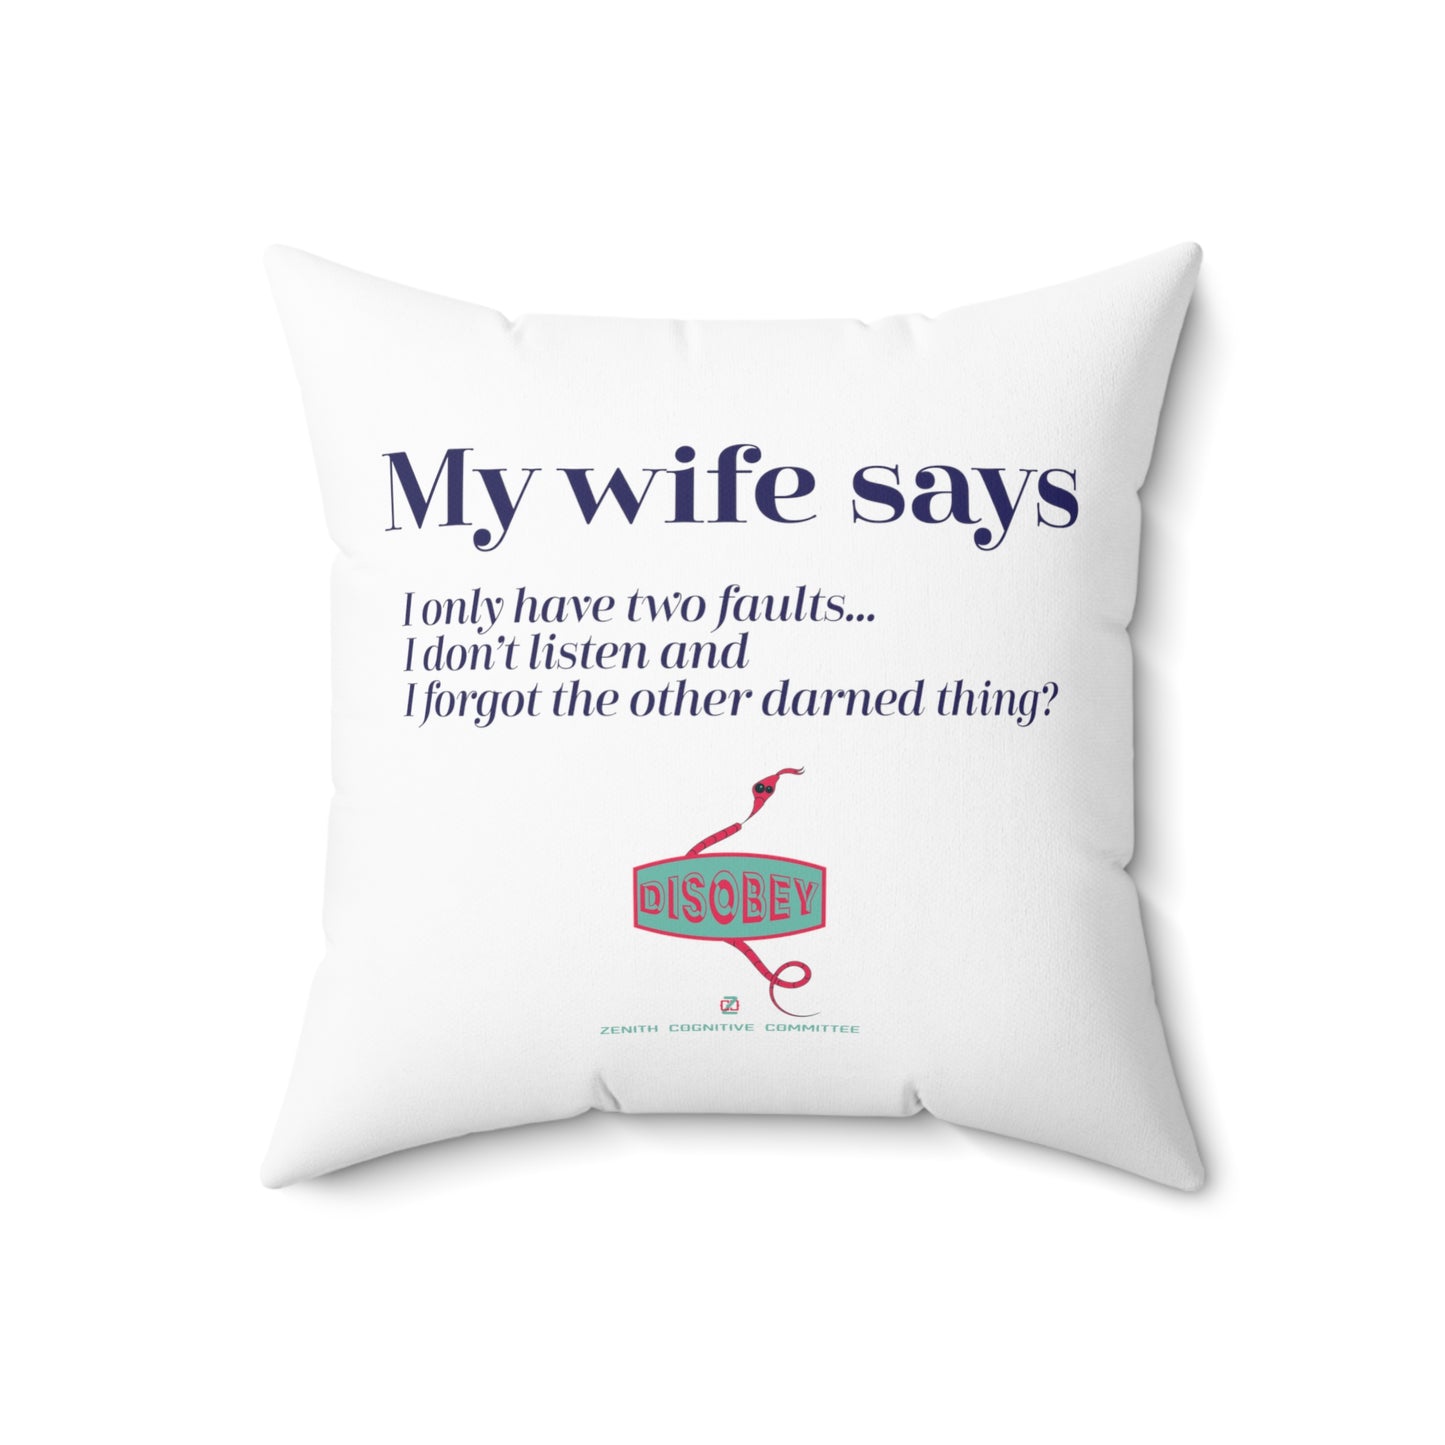 Spun Polyester Square Pillow Kukloso ' The Mother of all Notices' - Free Shipping